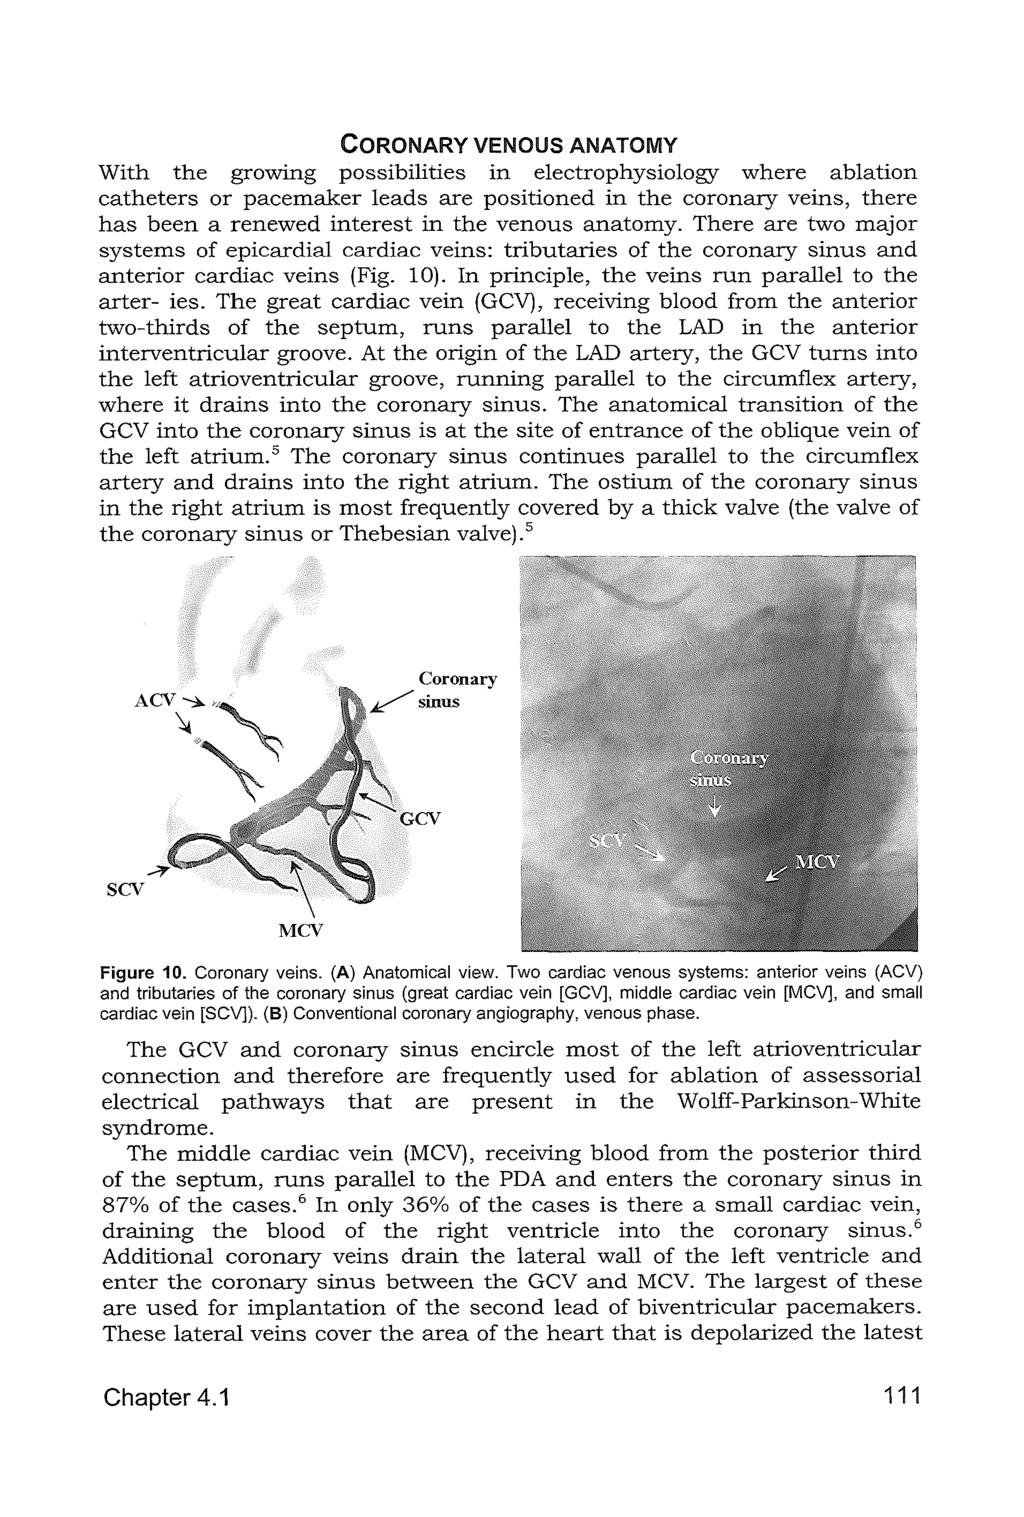 CORONARY VENOUS ANATOMY With the growing possibilities in electrophysiology where ablation catheters or pacemaker leads are positioned in the coronary veins, there has been a renewed interest in the